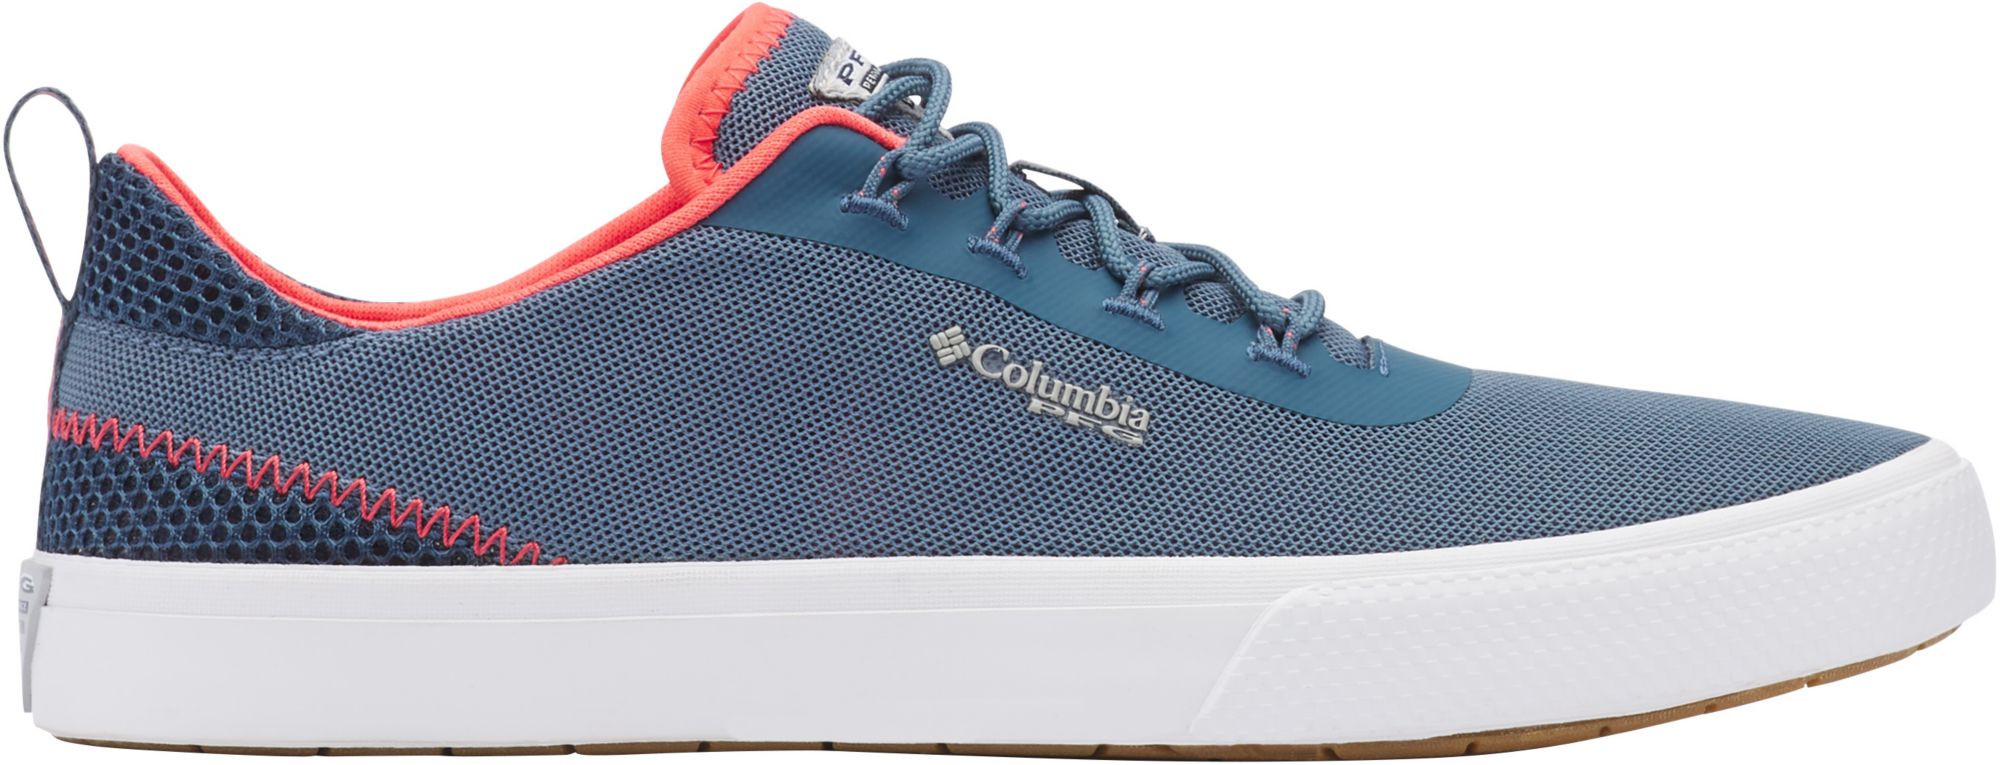 columbia blue shoes